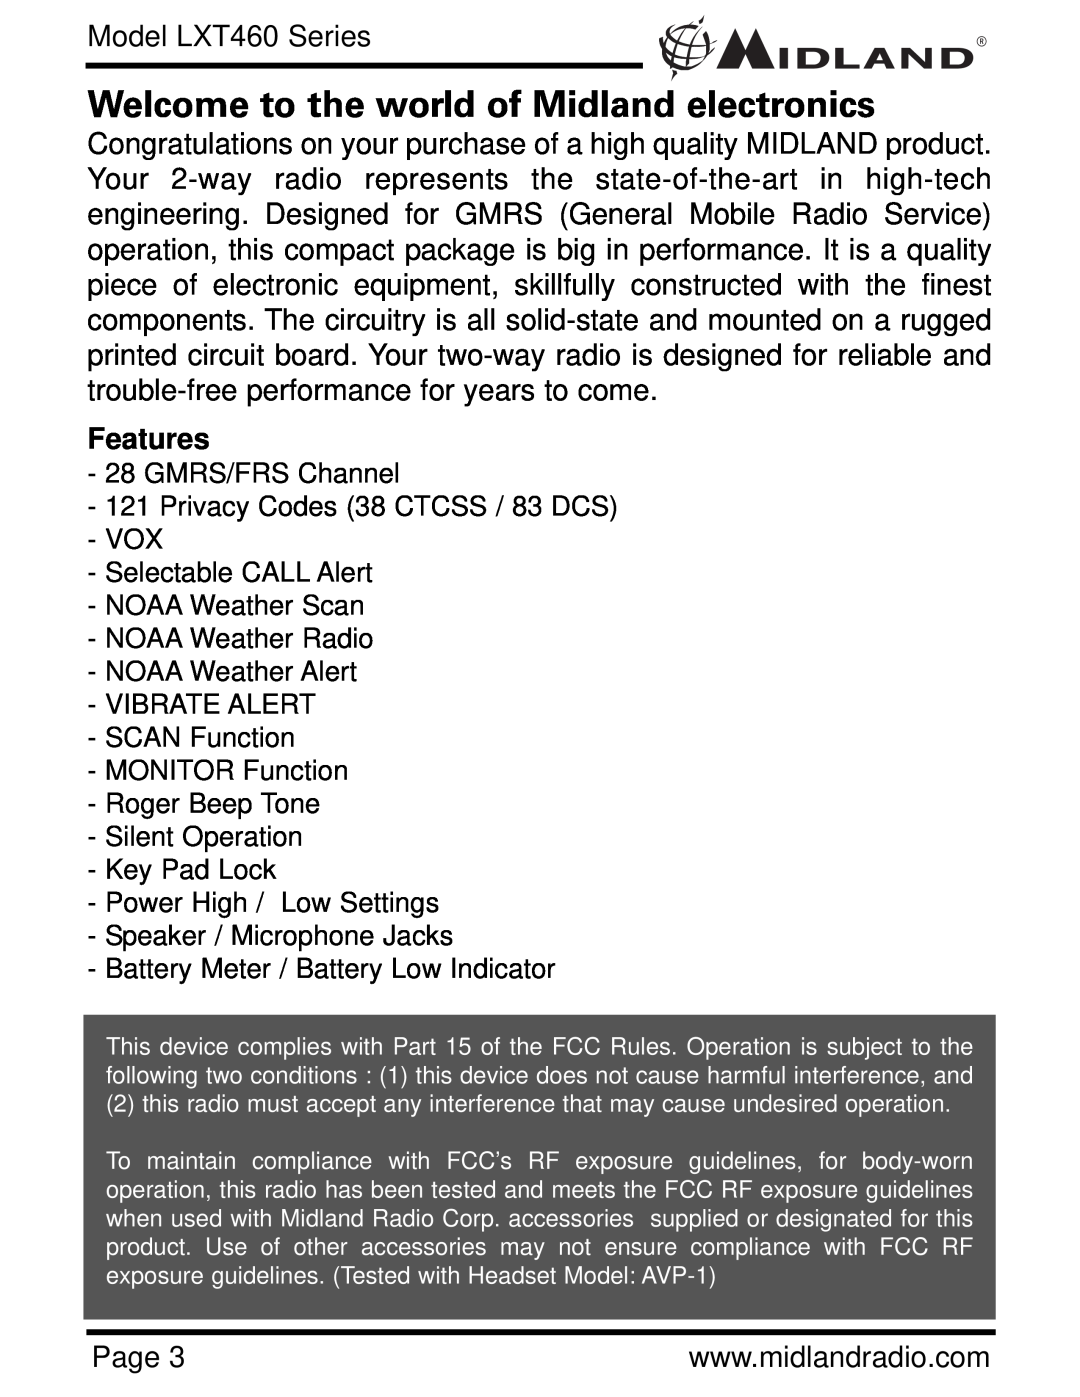 Midland Radio owner manual Welcome to the world of Midland electronics, Features, Model LXT460 Series 